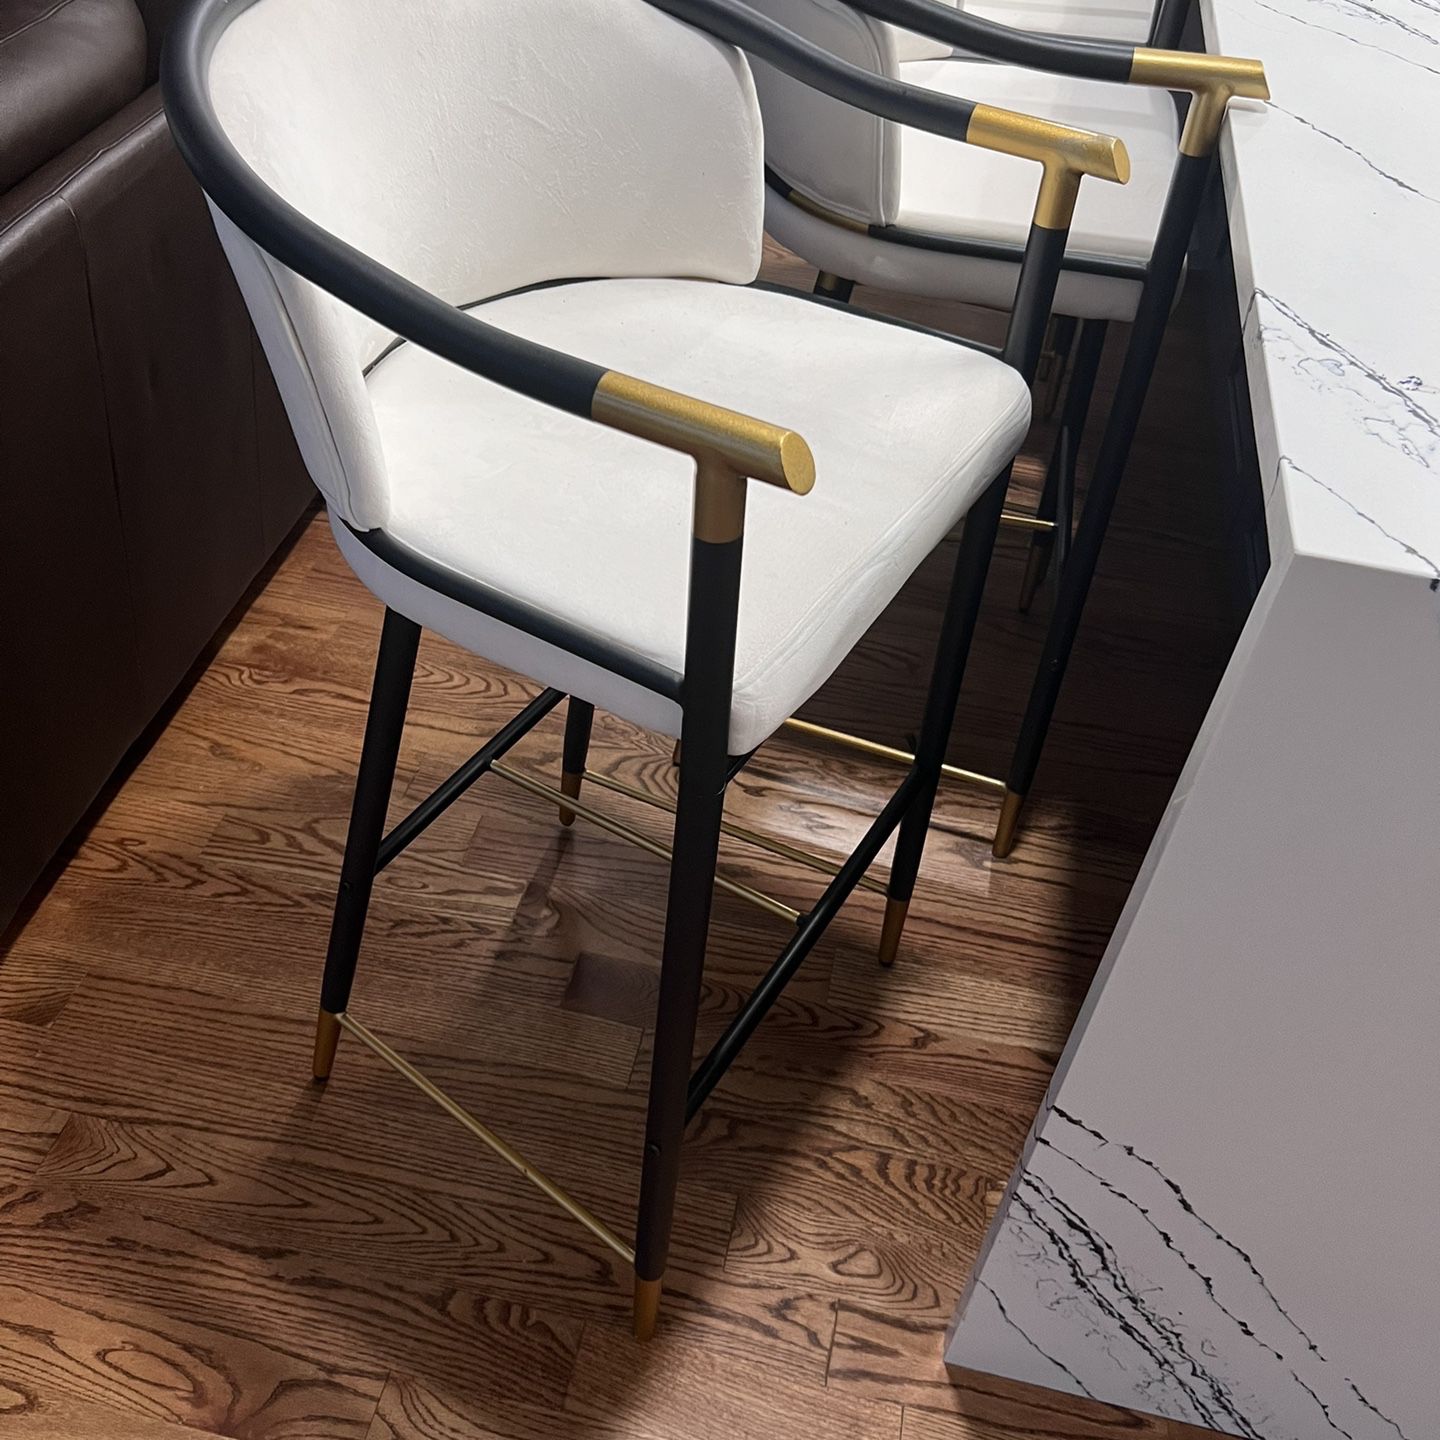 250 each - Craines Bar Height Bar Stool With Arms For Kitchen Island In Beige Upholstery Velvet